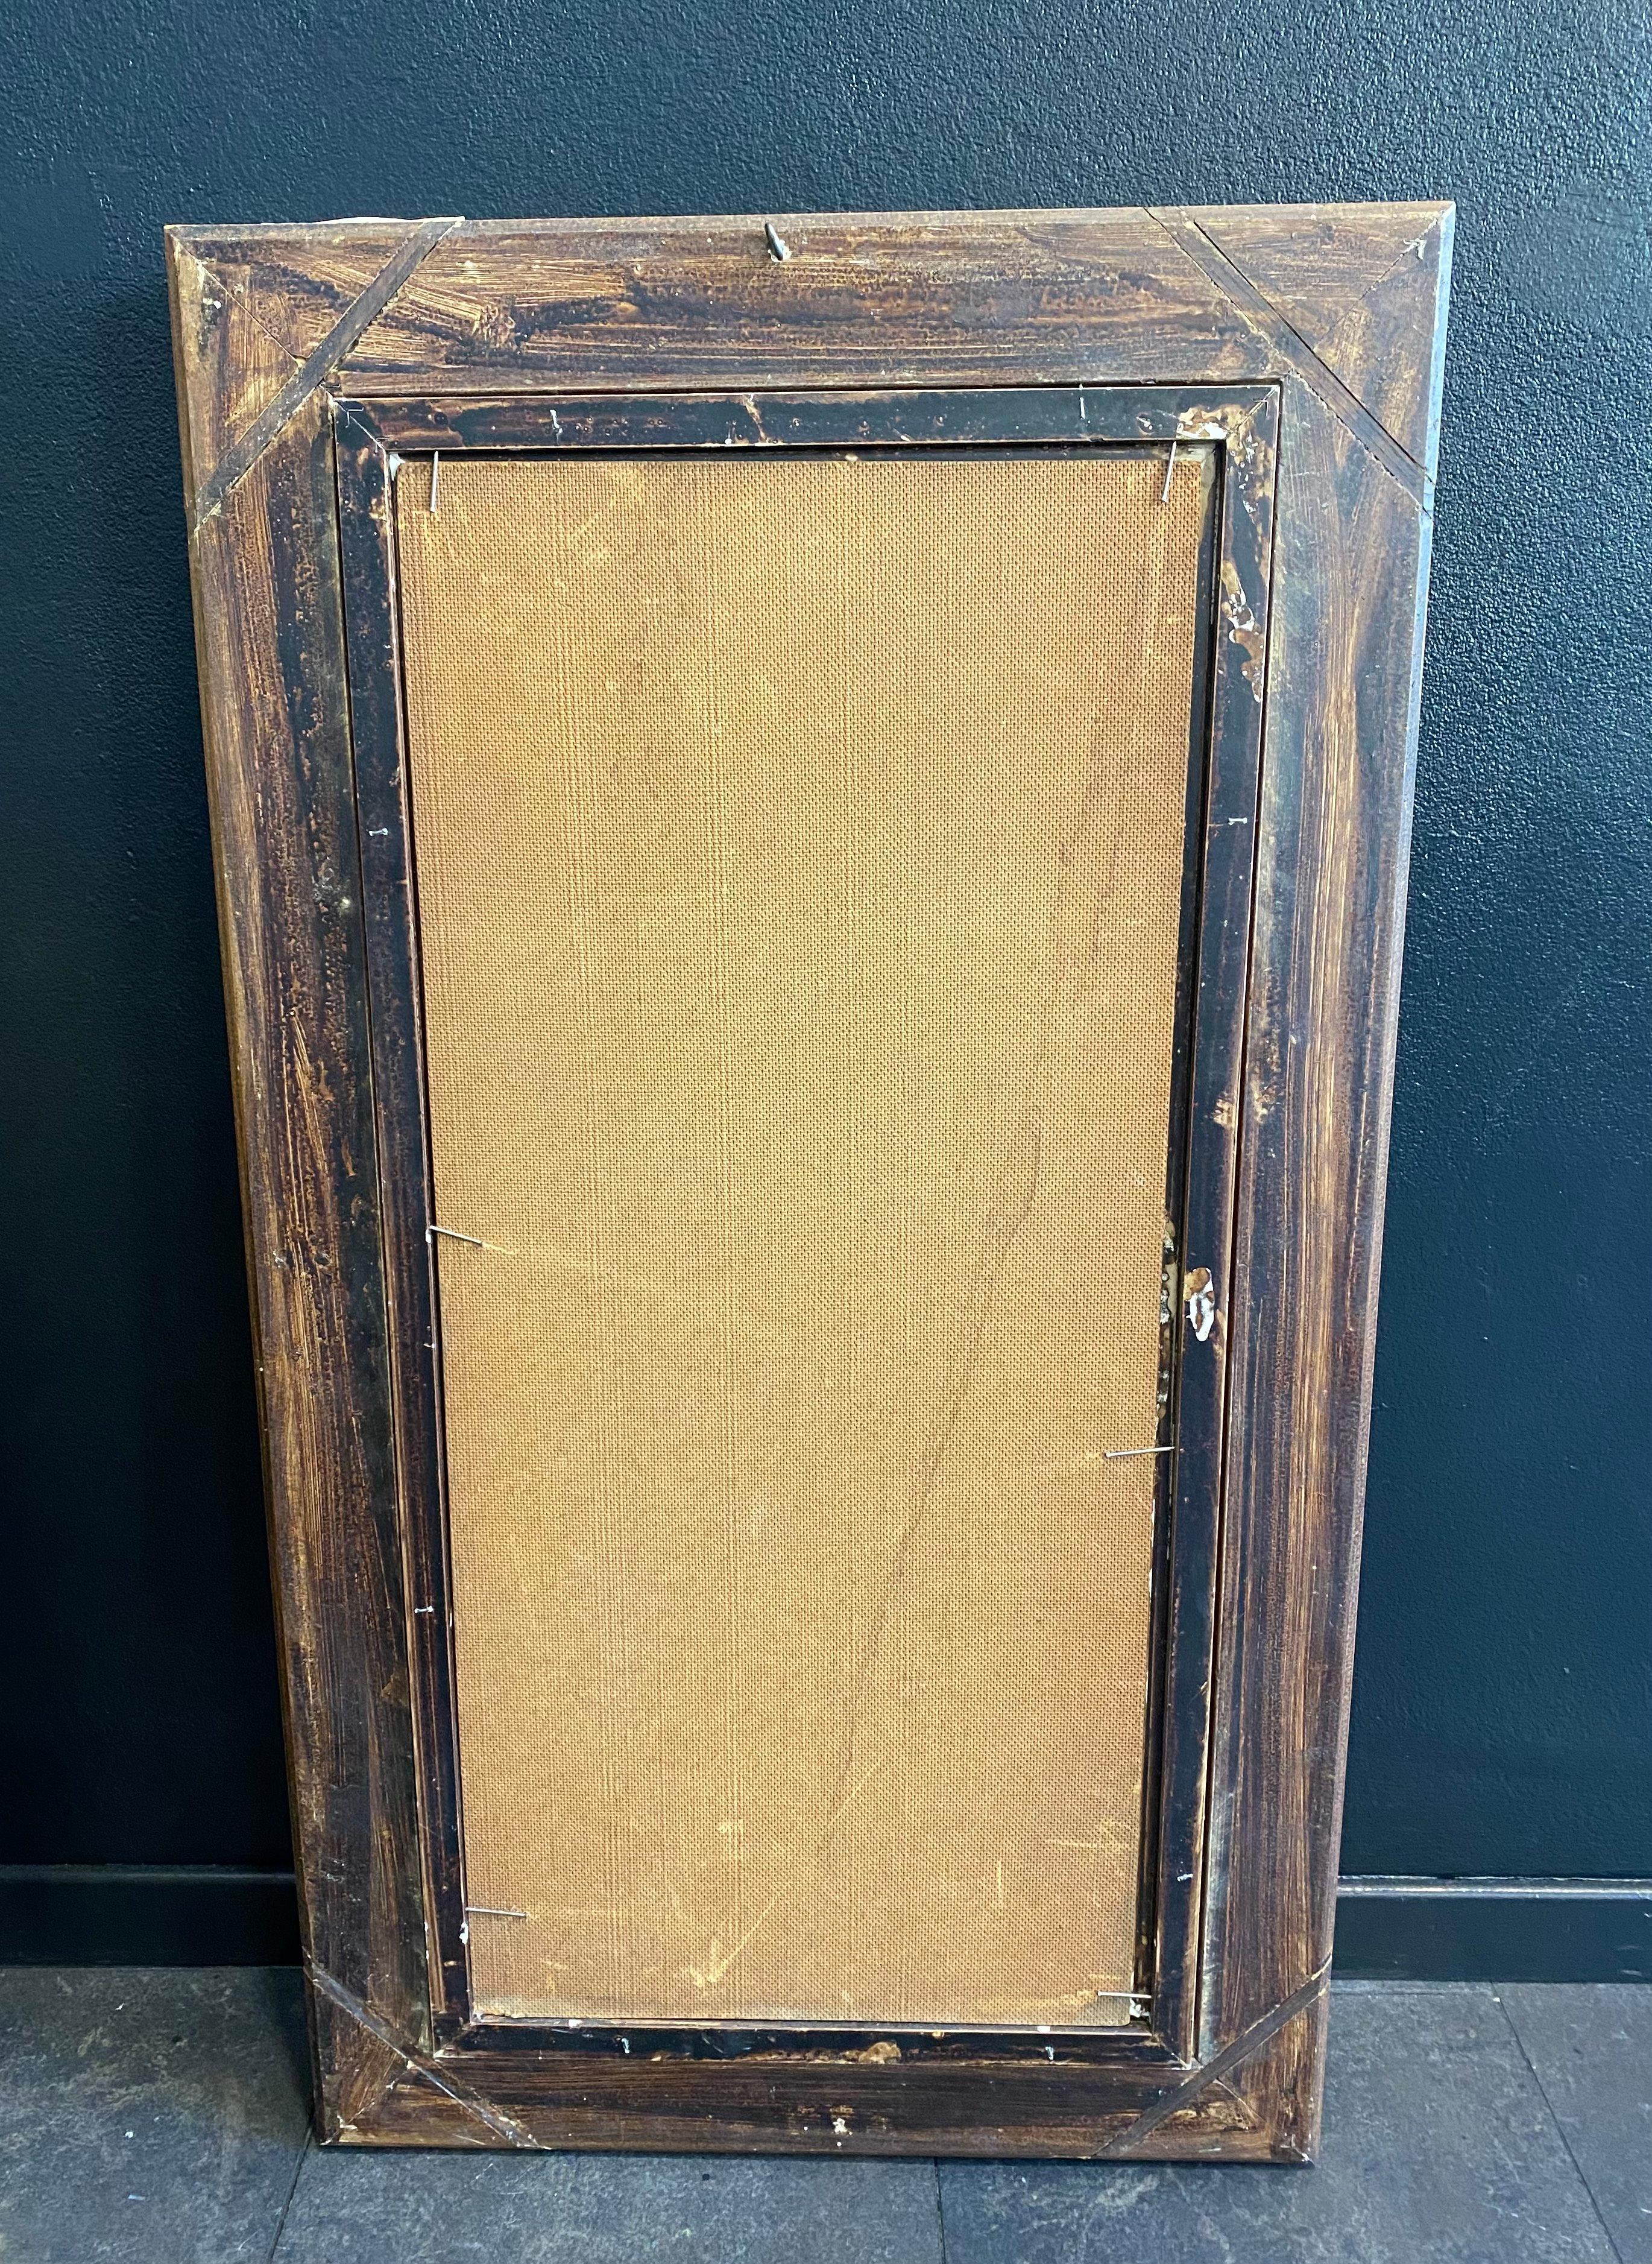 Original wood with moulds frame, sizes 91x51 cm